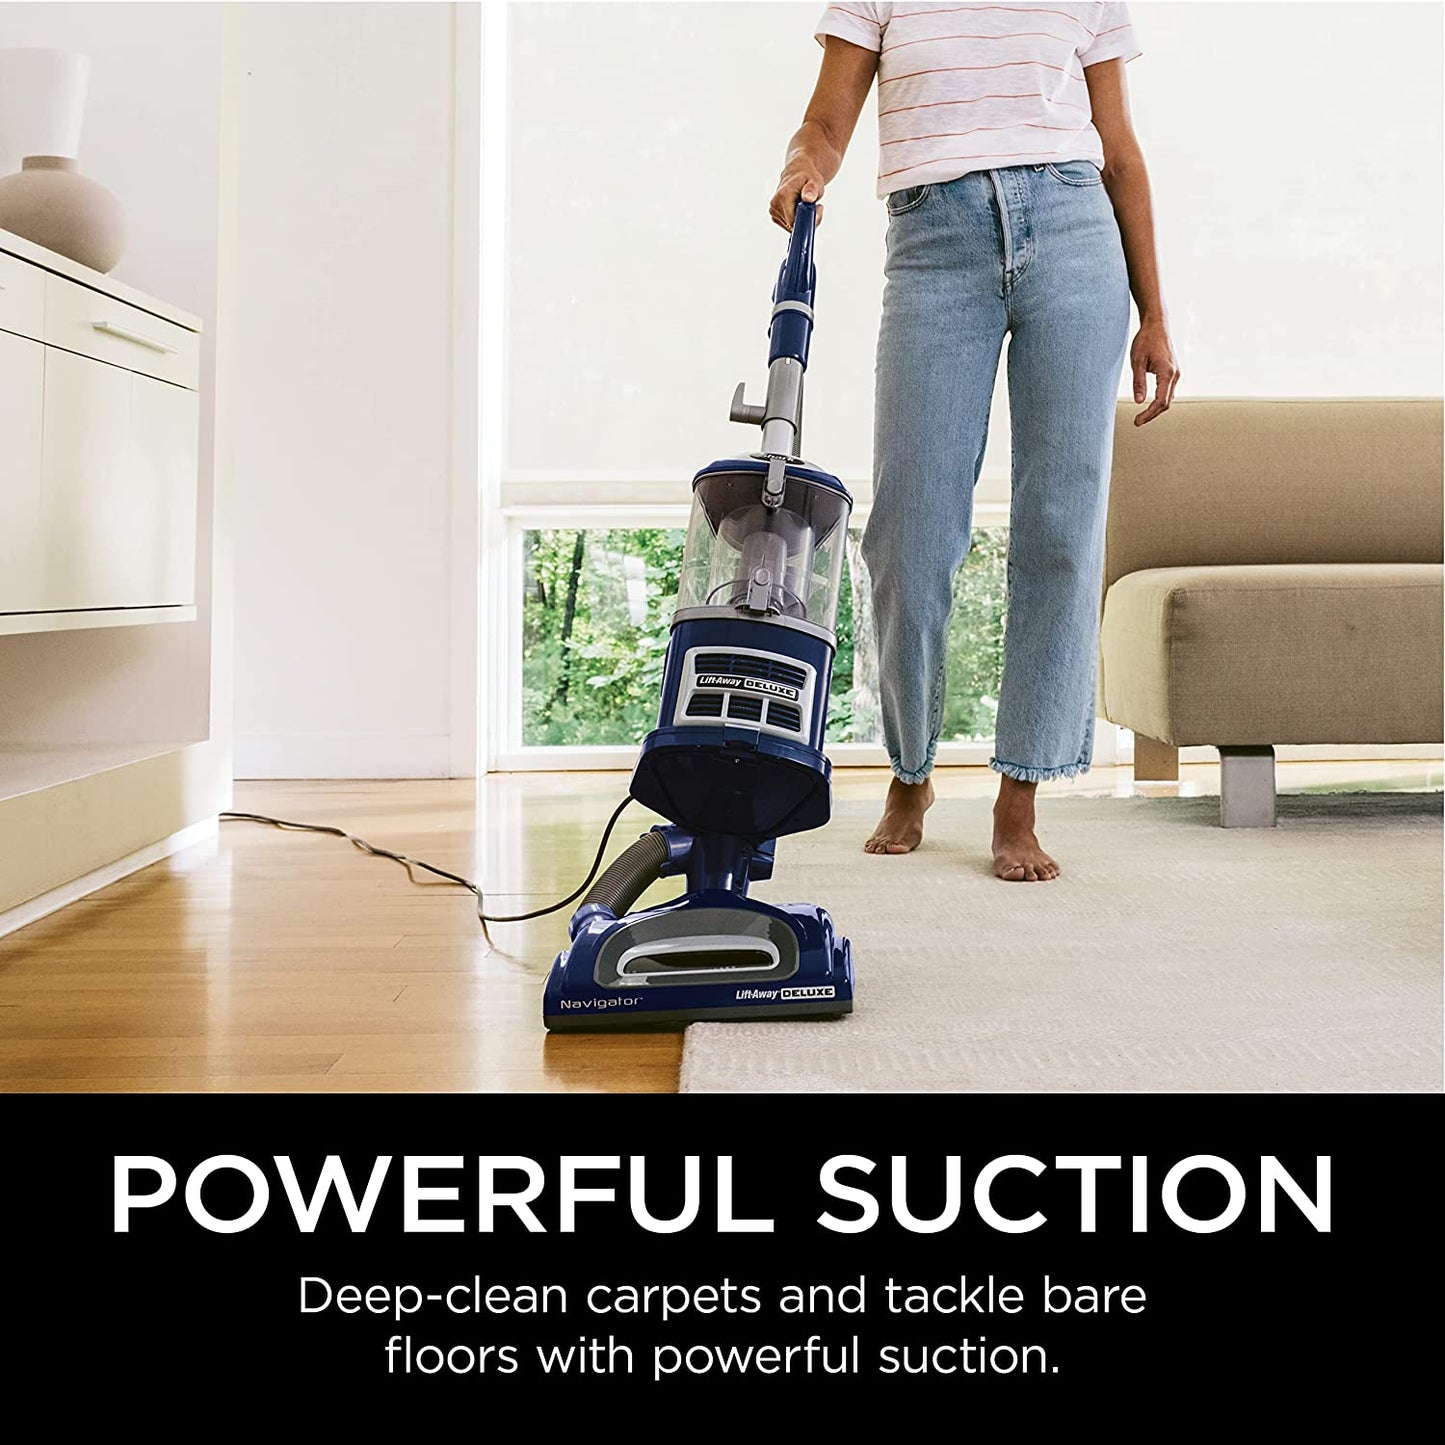 NV360 Navigator Lift-Away Deluxe Upright Vacuum with Large Dust Cup Capacity, HEPA Filter, Swivel Steering, Upholstery Tool & Crevice Tool, Blue